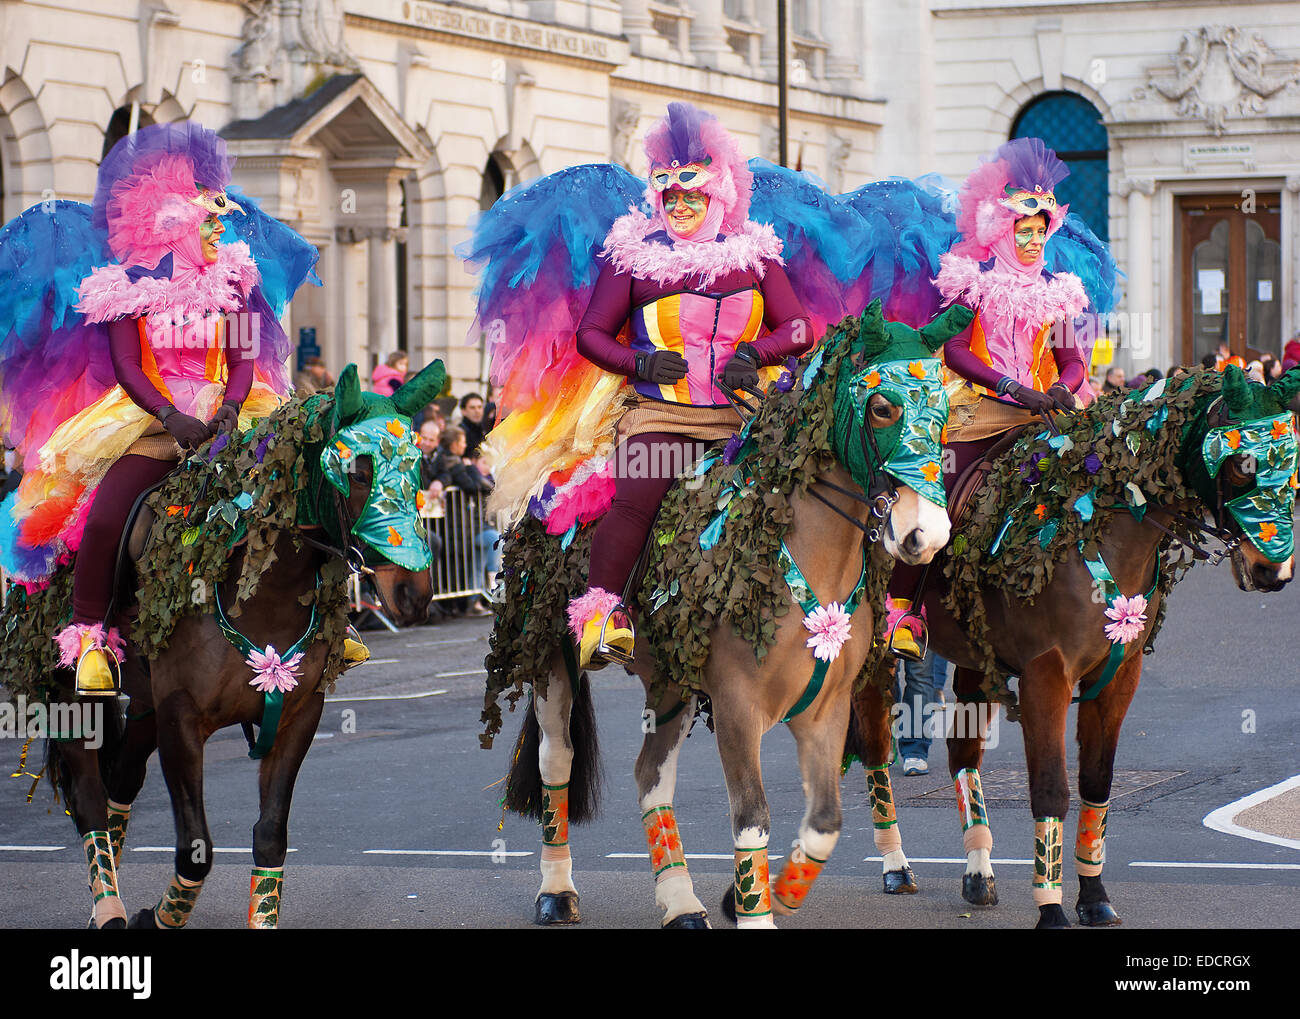 Some of the Queen's horses take part in the London New Year's Day parade. Stock Photo